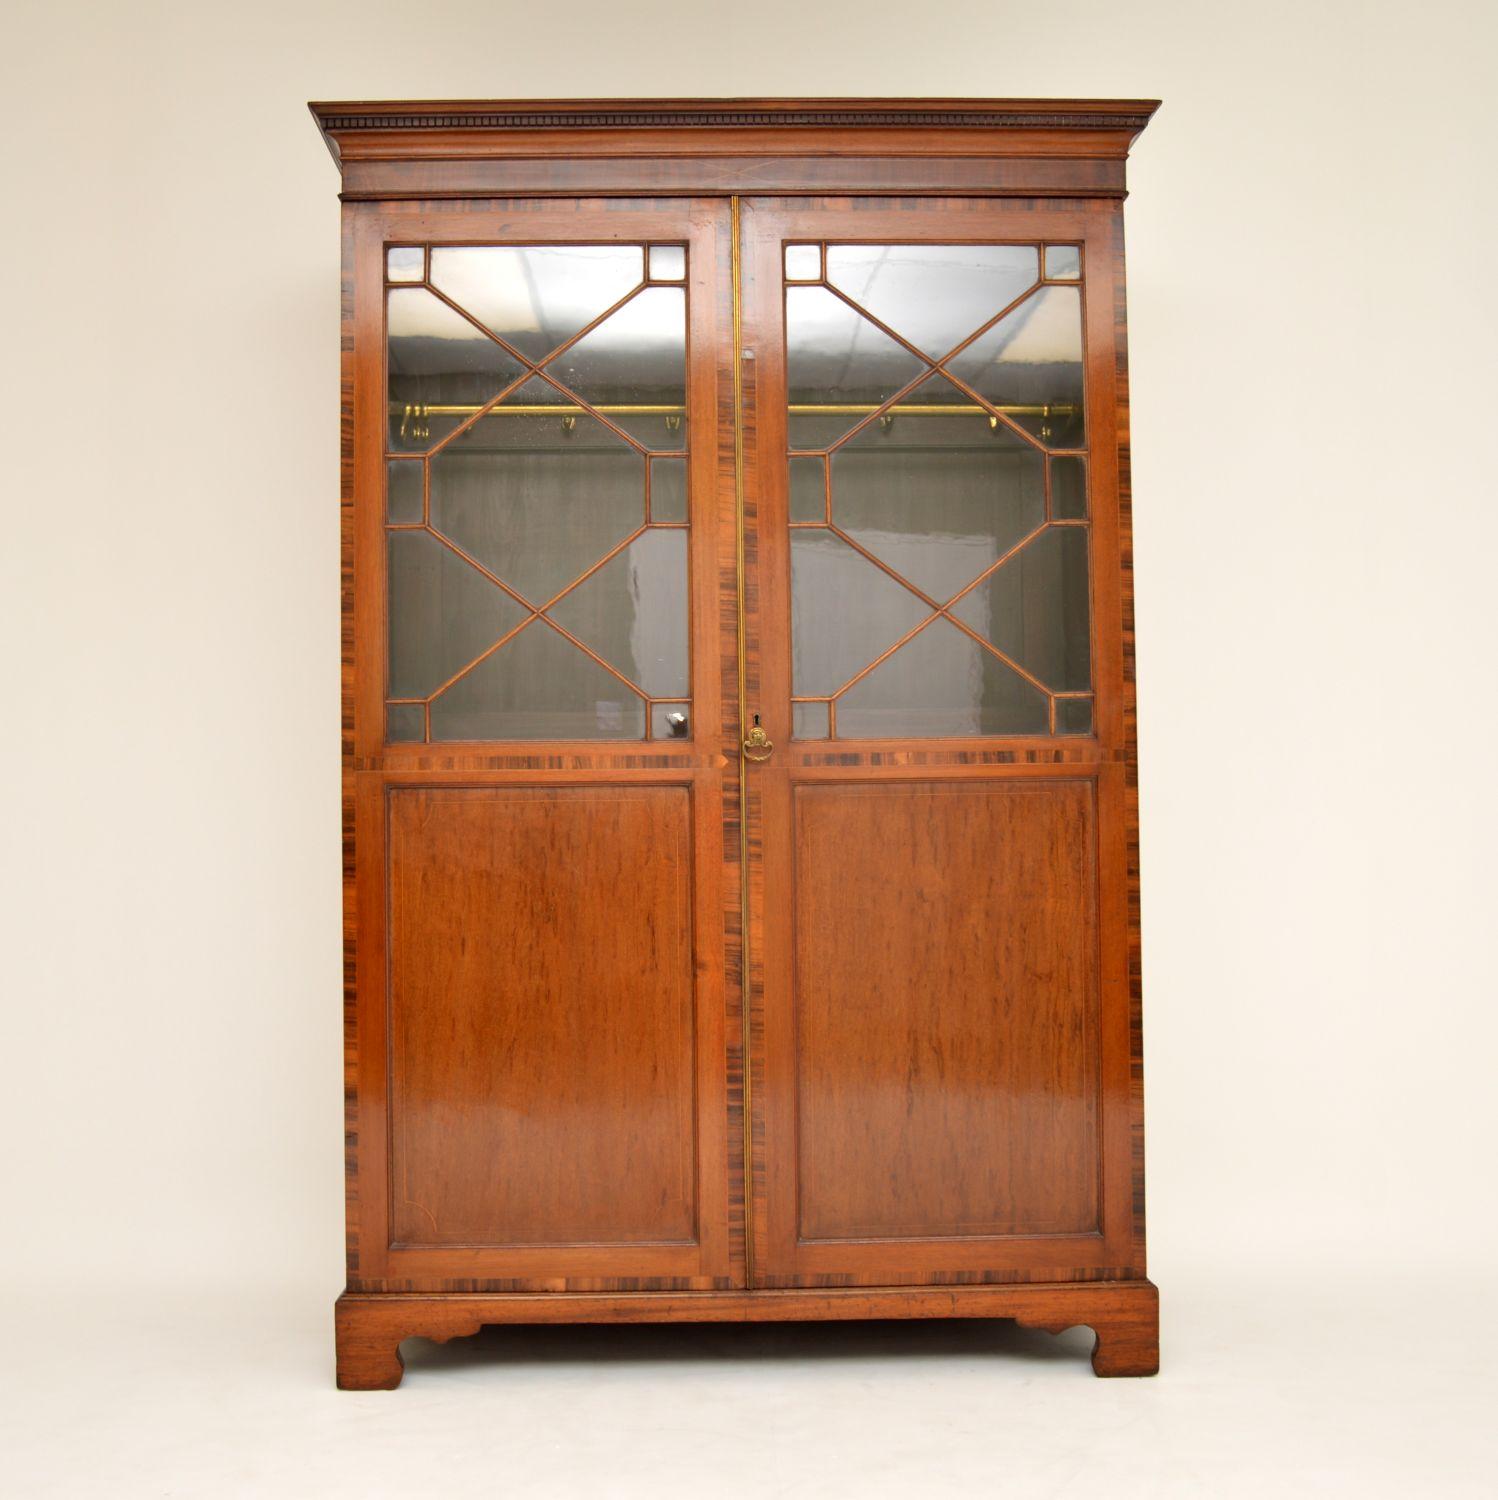 This antique mahogany wardrobe is quite unusual because it has astral-glazing within the doors. The glass looks really old and you can see the ripples and bubbles on it. I think this wardrobe could be Georgian, looking at the construction and glass,